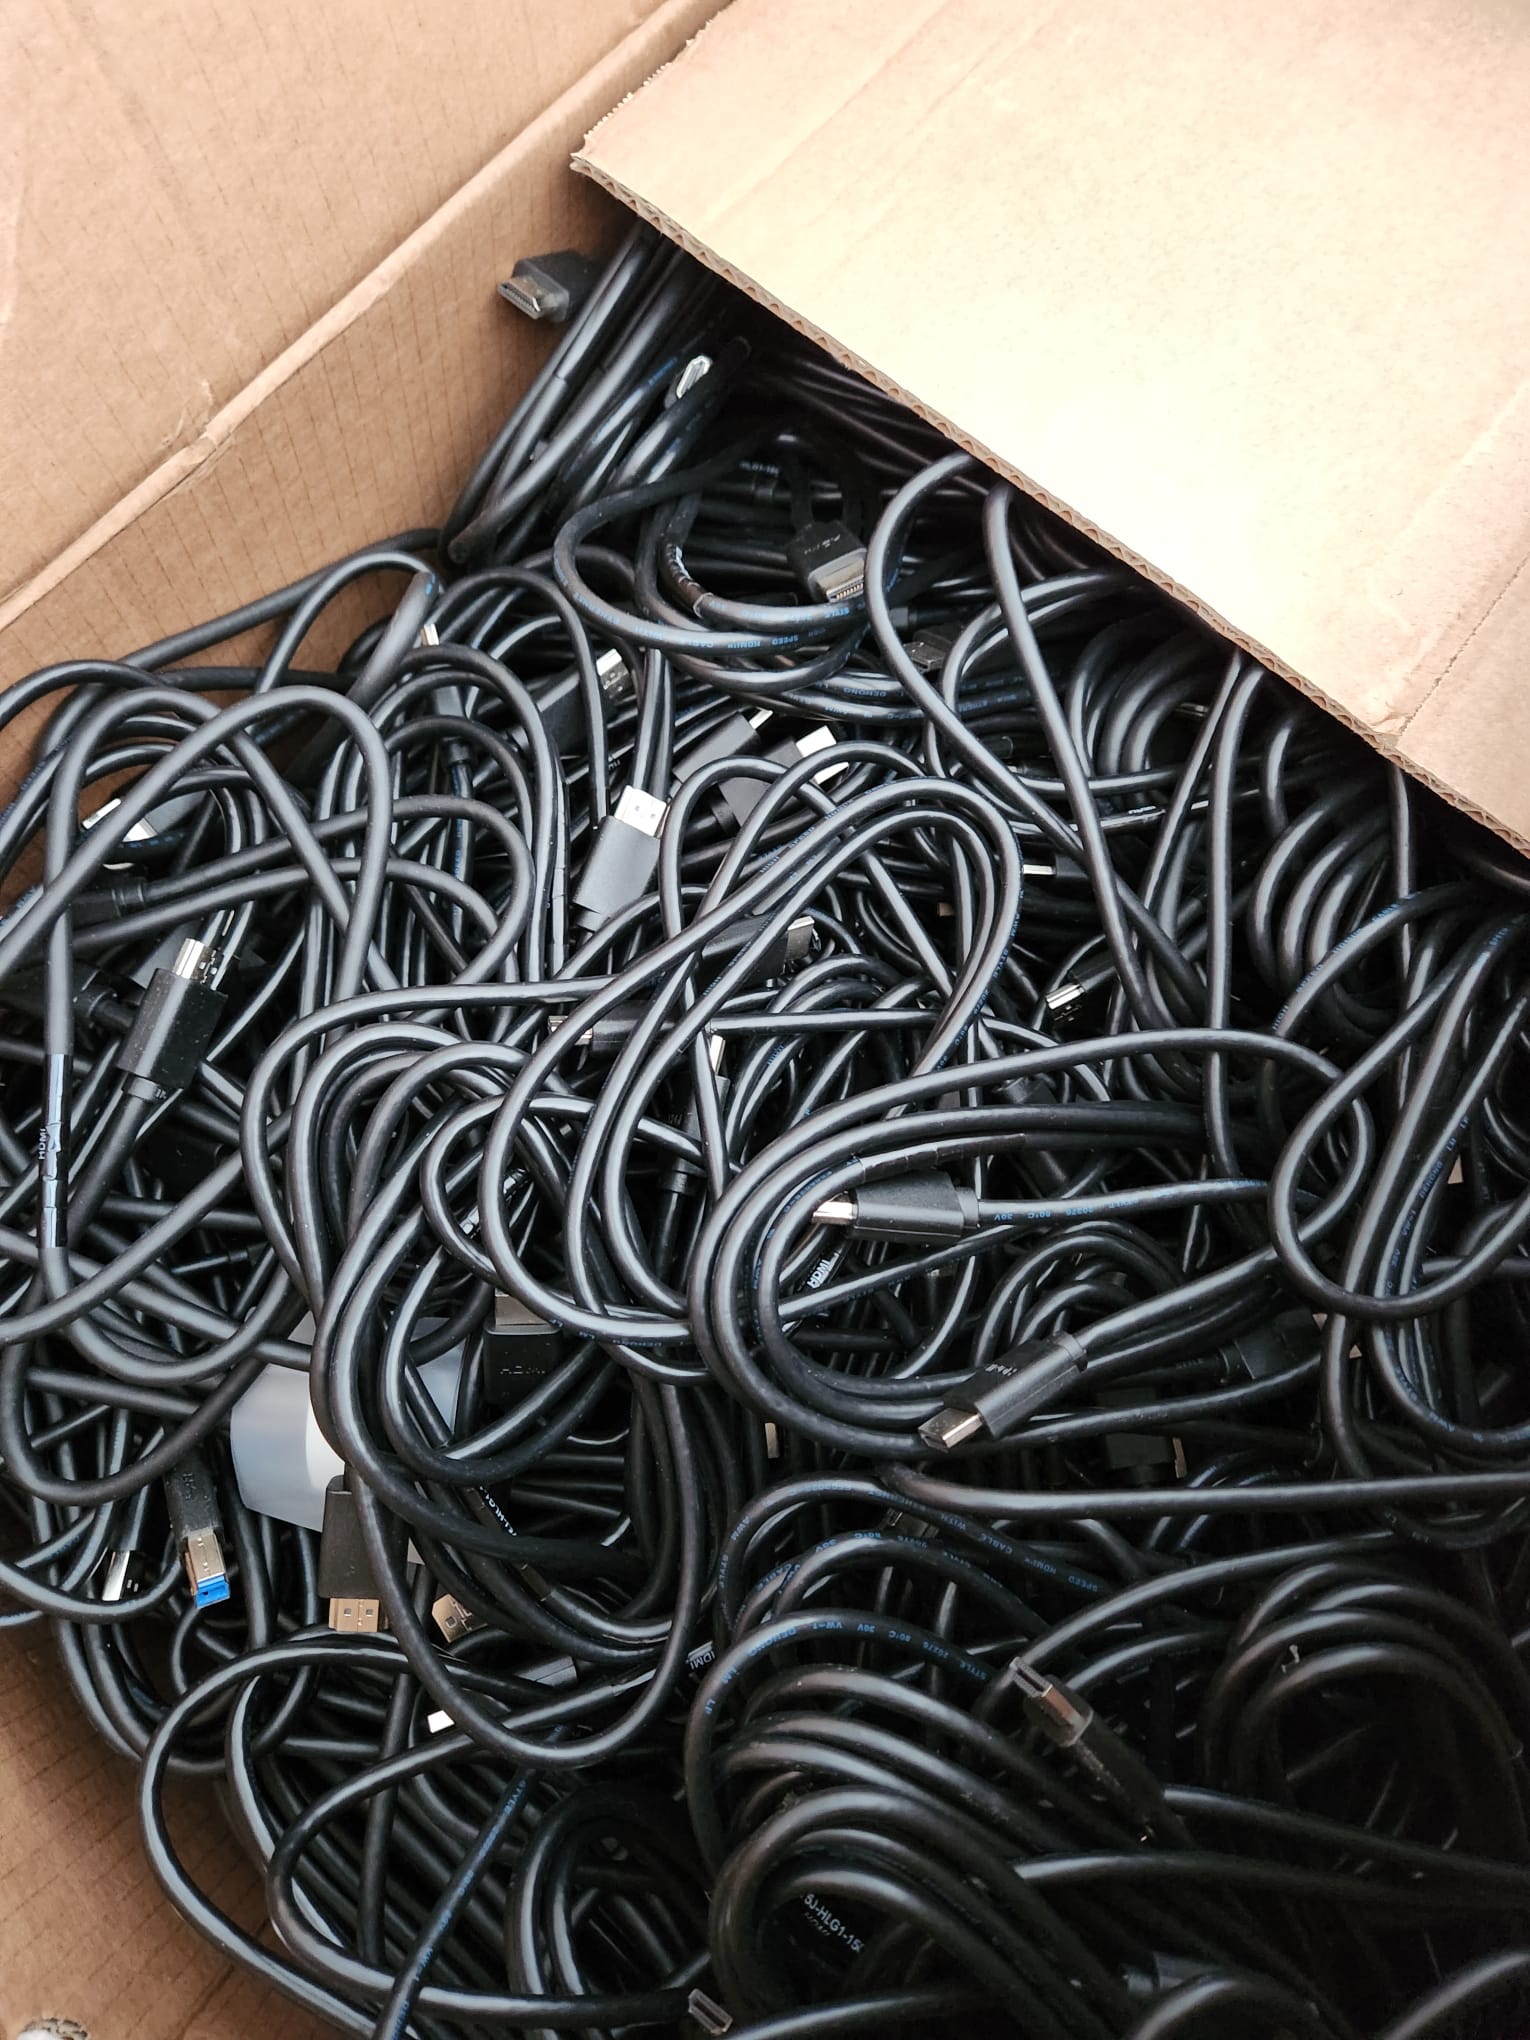 Lot of brand new cables. MIX Hdmi, Display port, Source cable, USB